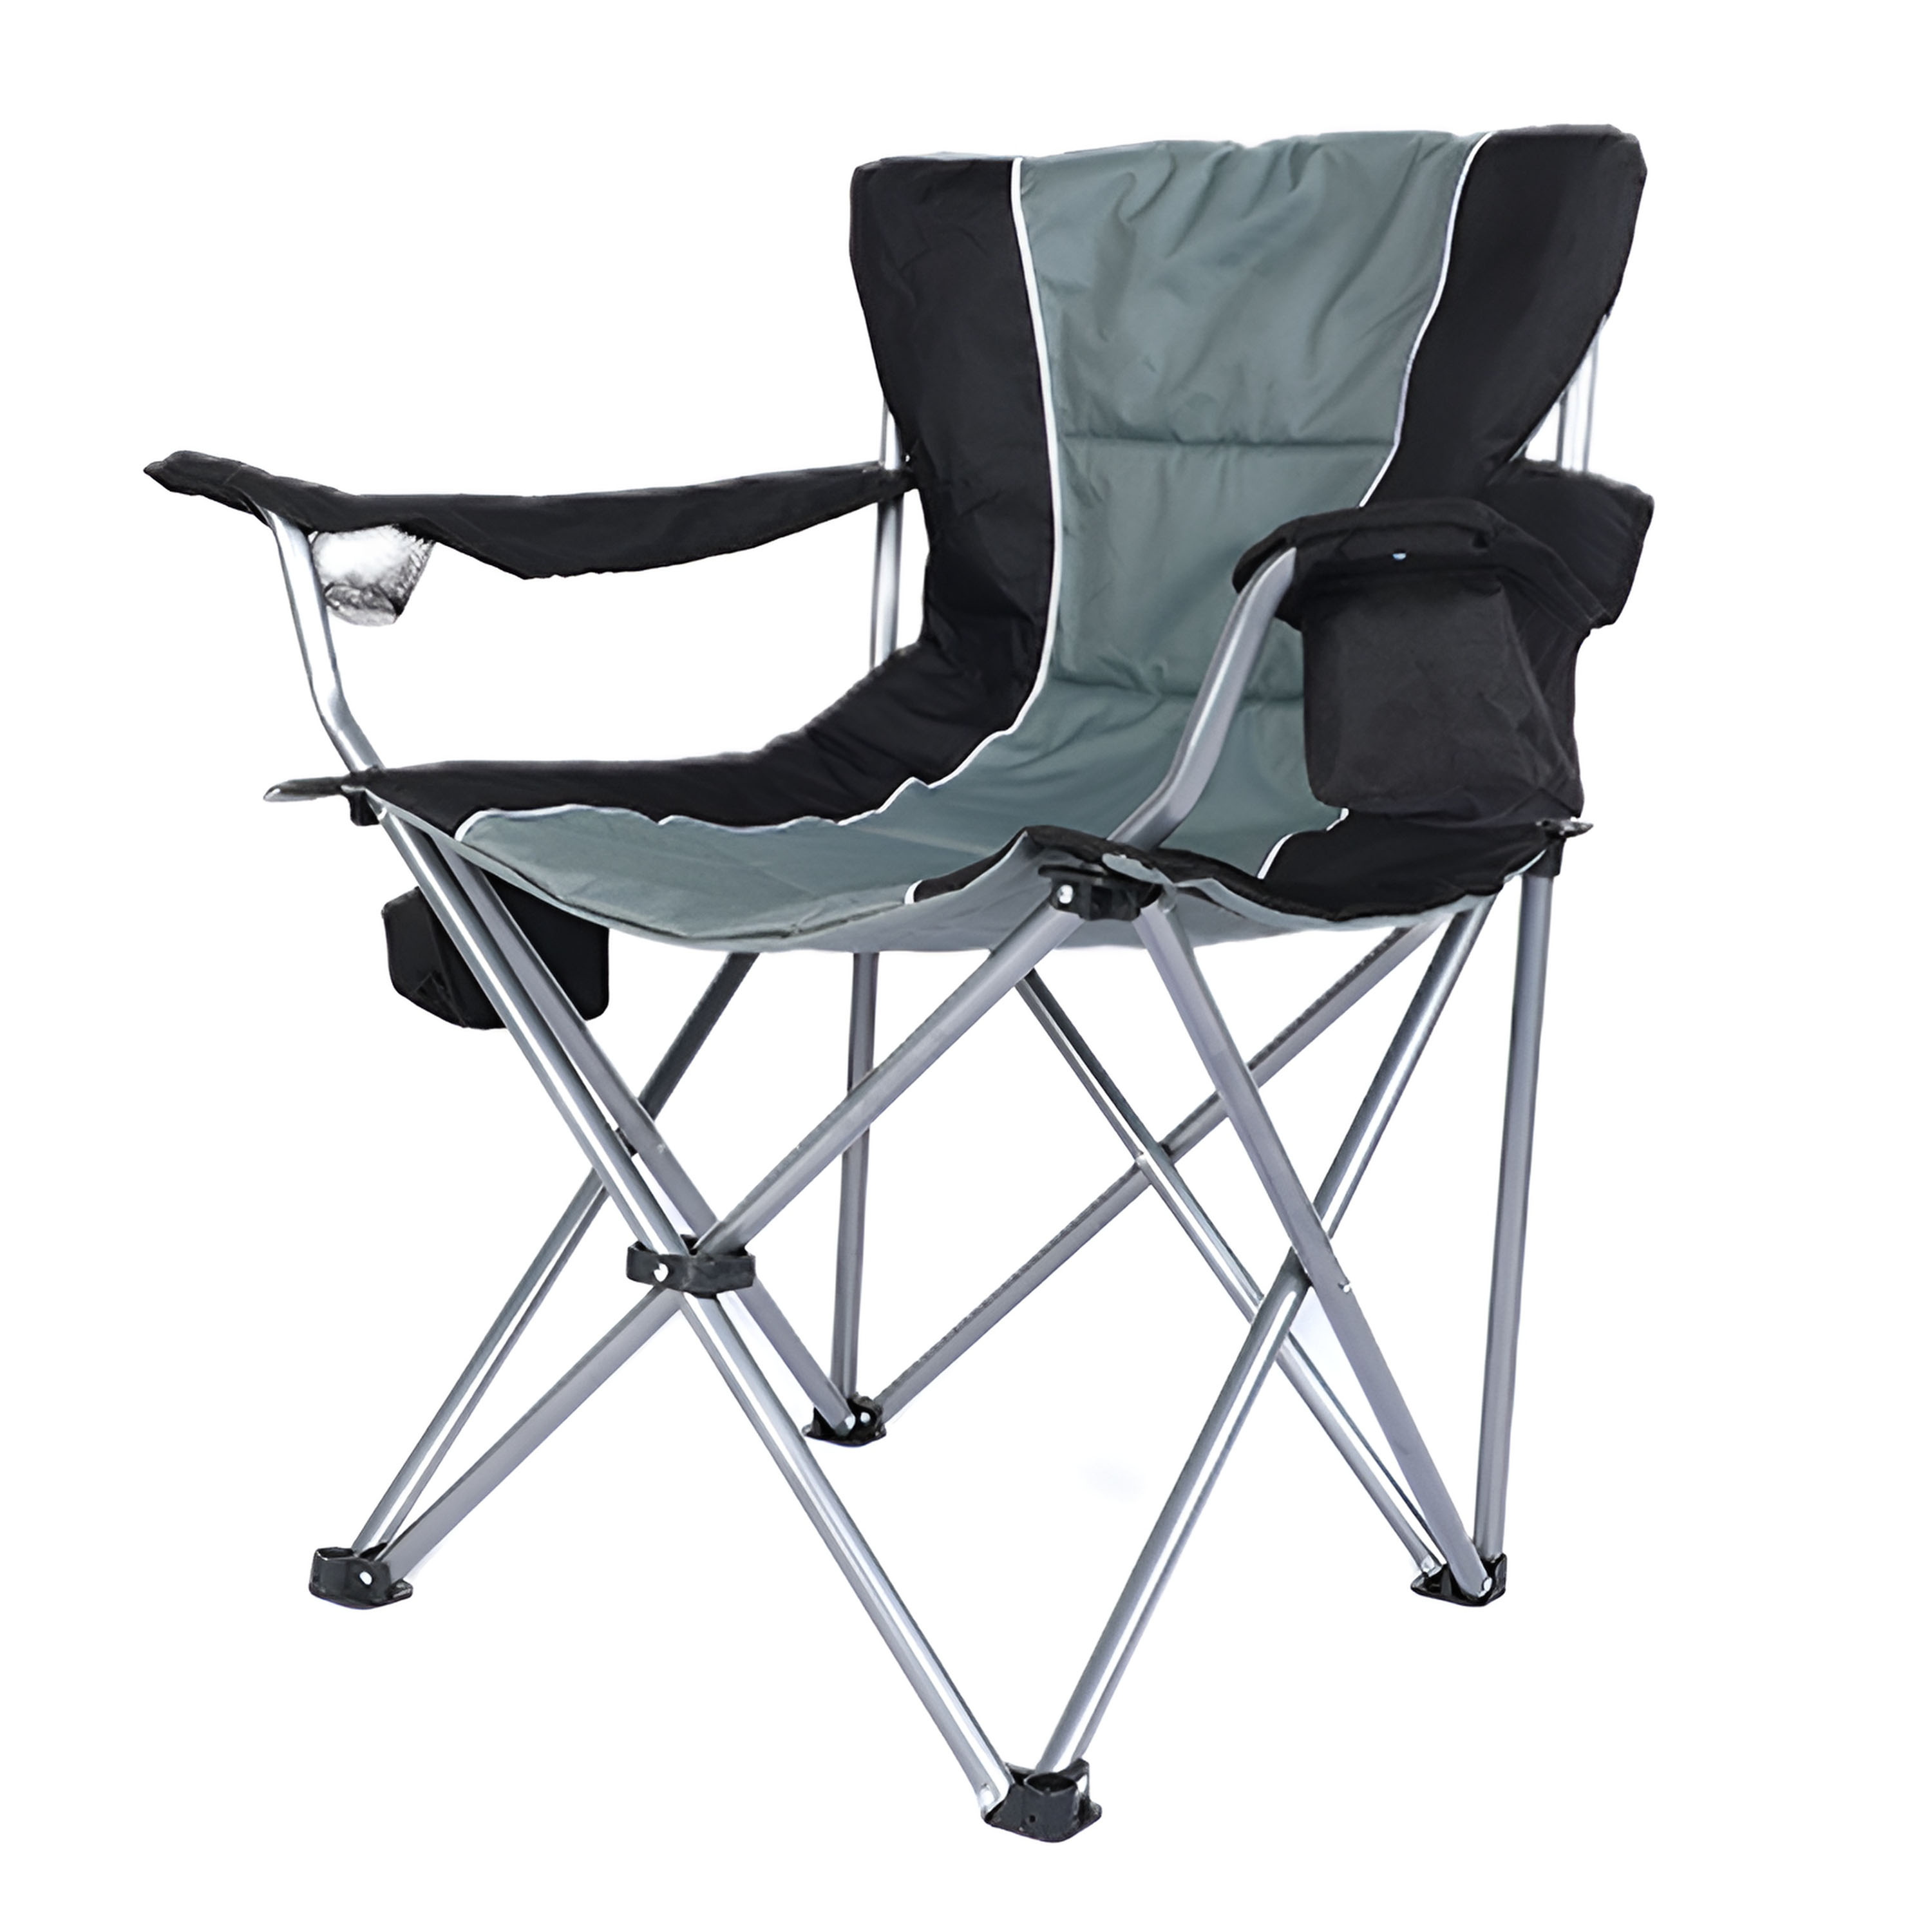 YSSOA Oversized Camping Folding Chair with Cup Holder, Side Cooler Bag